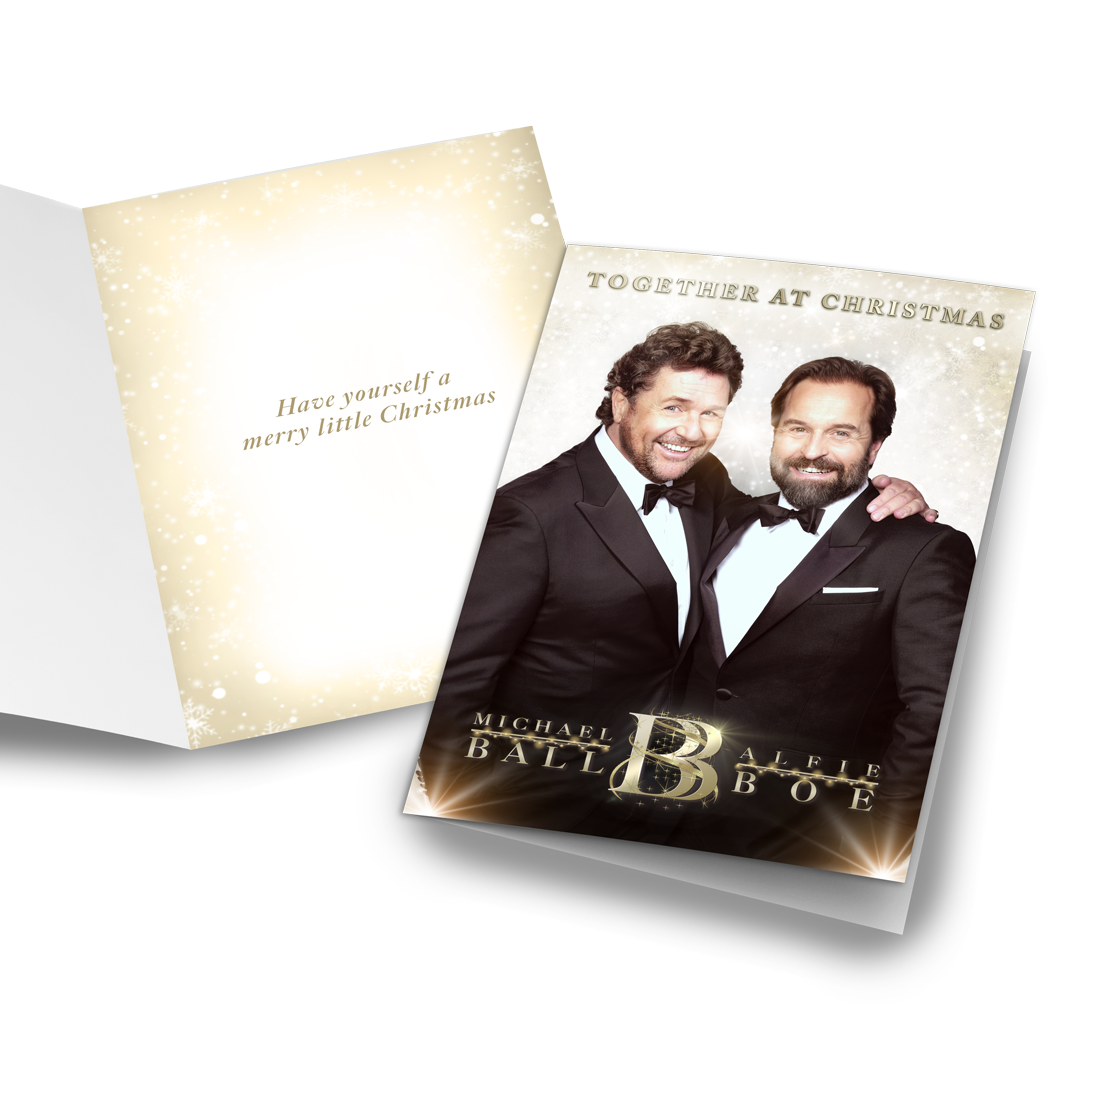 Michael Ball & Alfie Boe - Together at Christmas Card